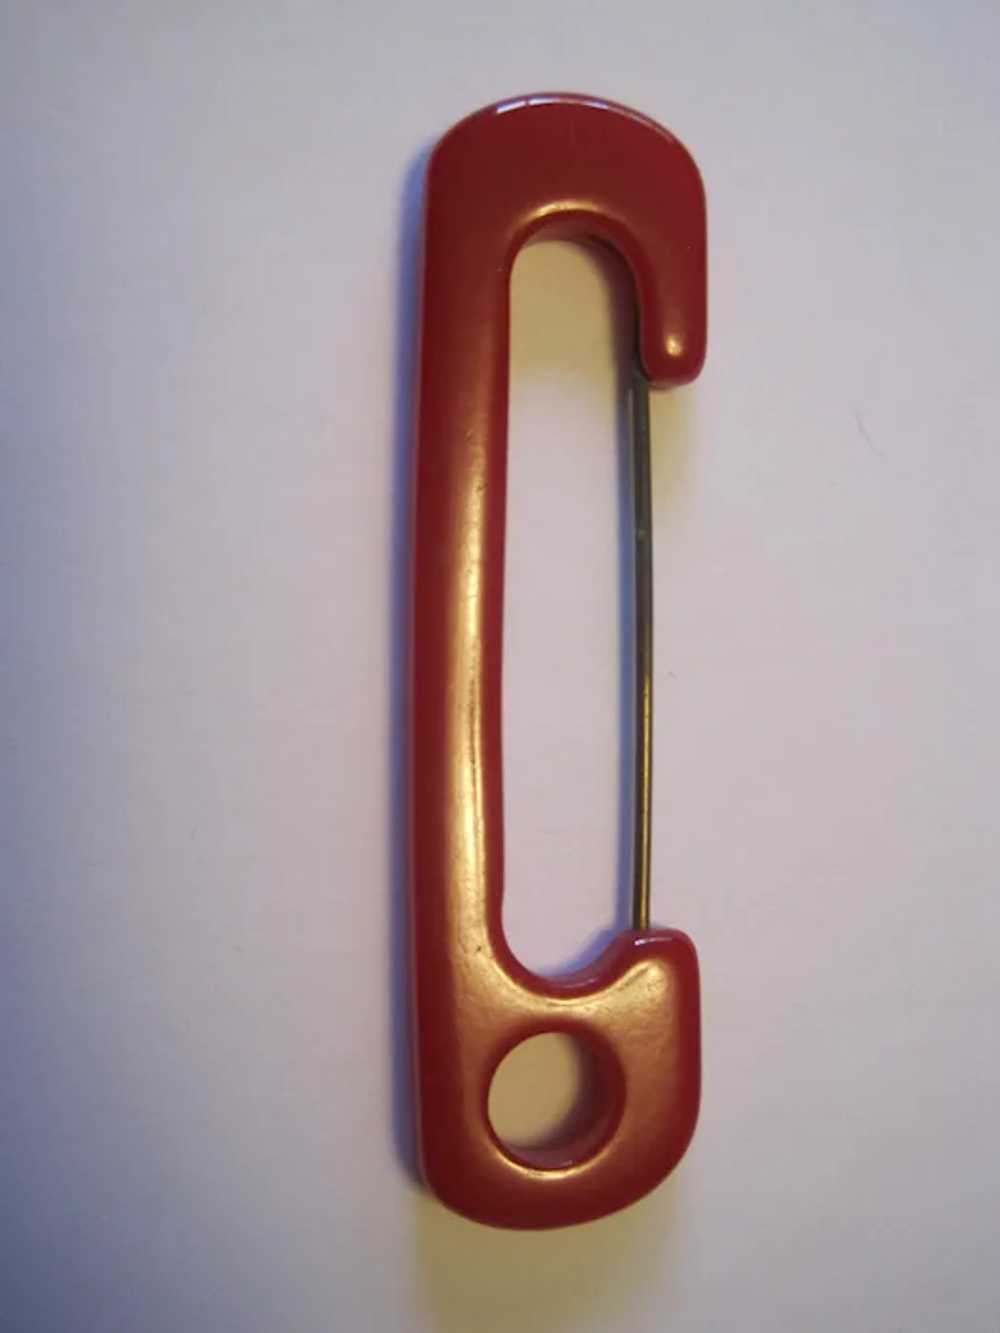 14K Vintage Safety Pin Simple Diaper Pin/Brooch Yellow Gold [CFXR